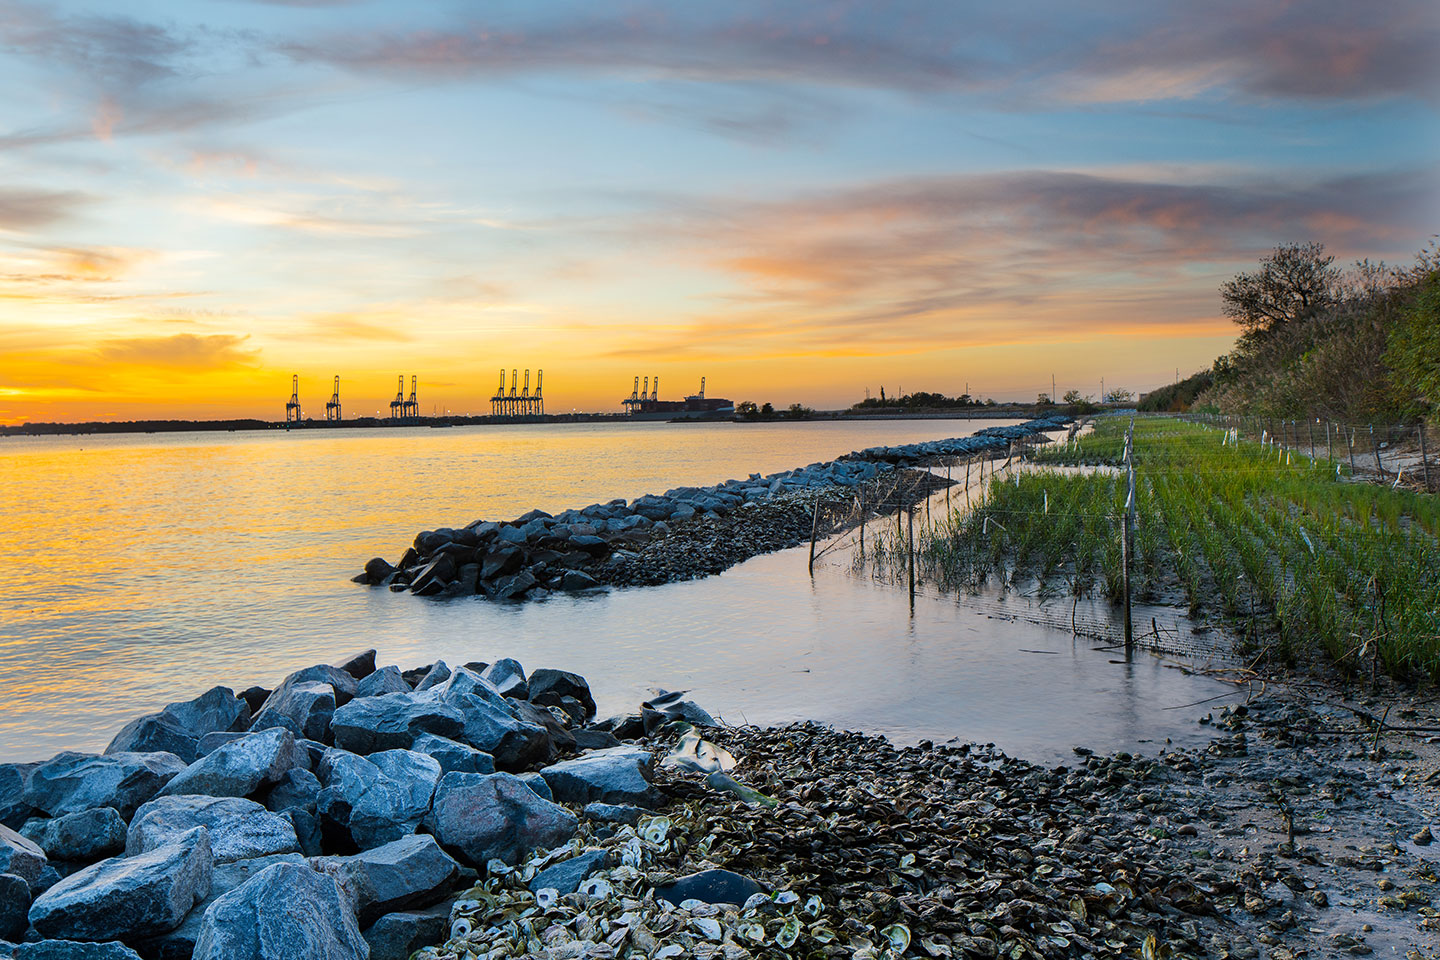 The living shoreline at the Lamberts Point Terminal helps bring the natural system back into balance, while protecting critical infrastructure and reclaiming lost land.